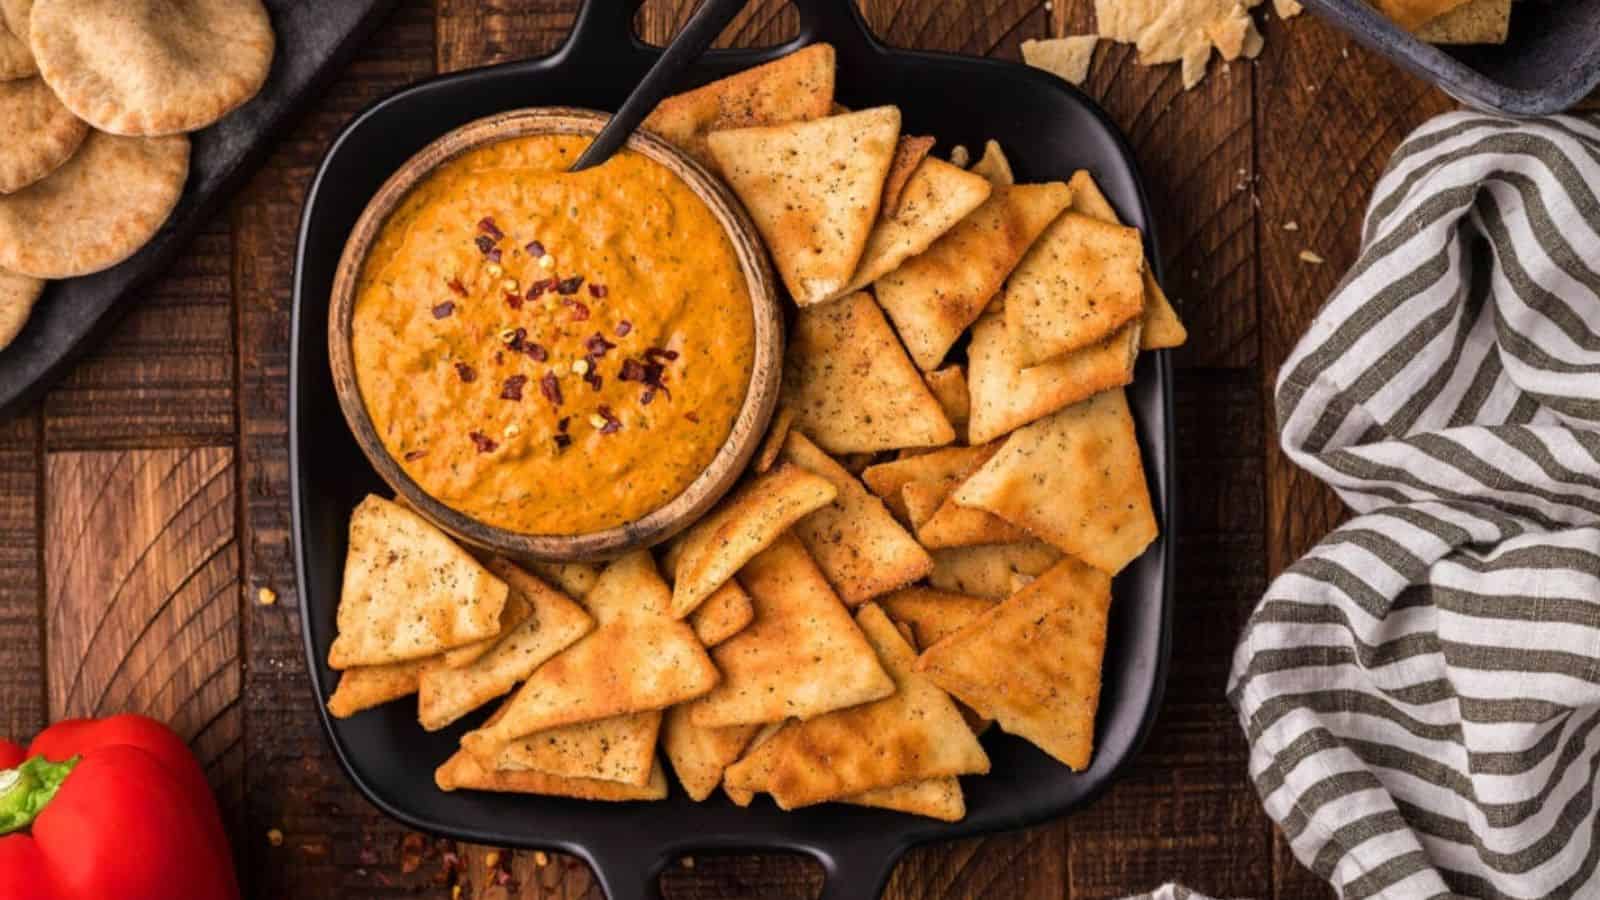 Overhead view of roasted red pepper cream cheese dip in a bowl with biscuits.